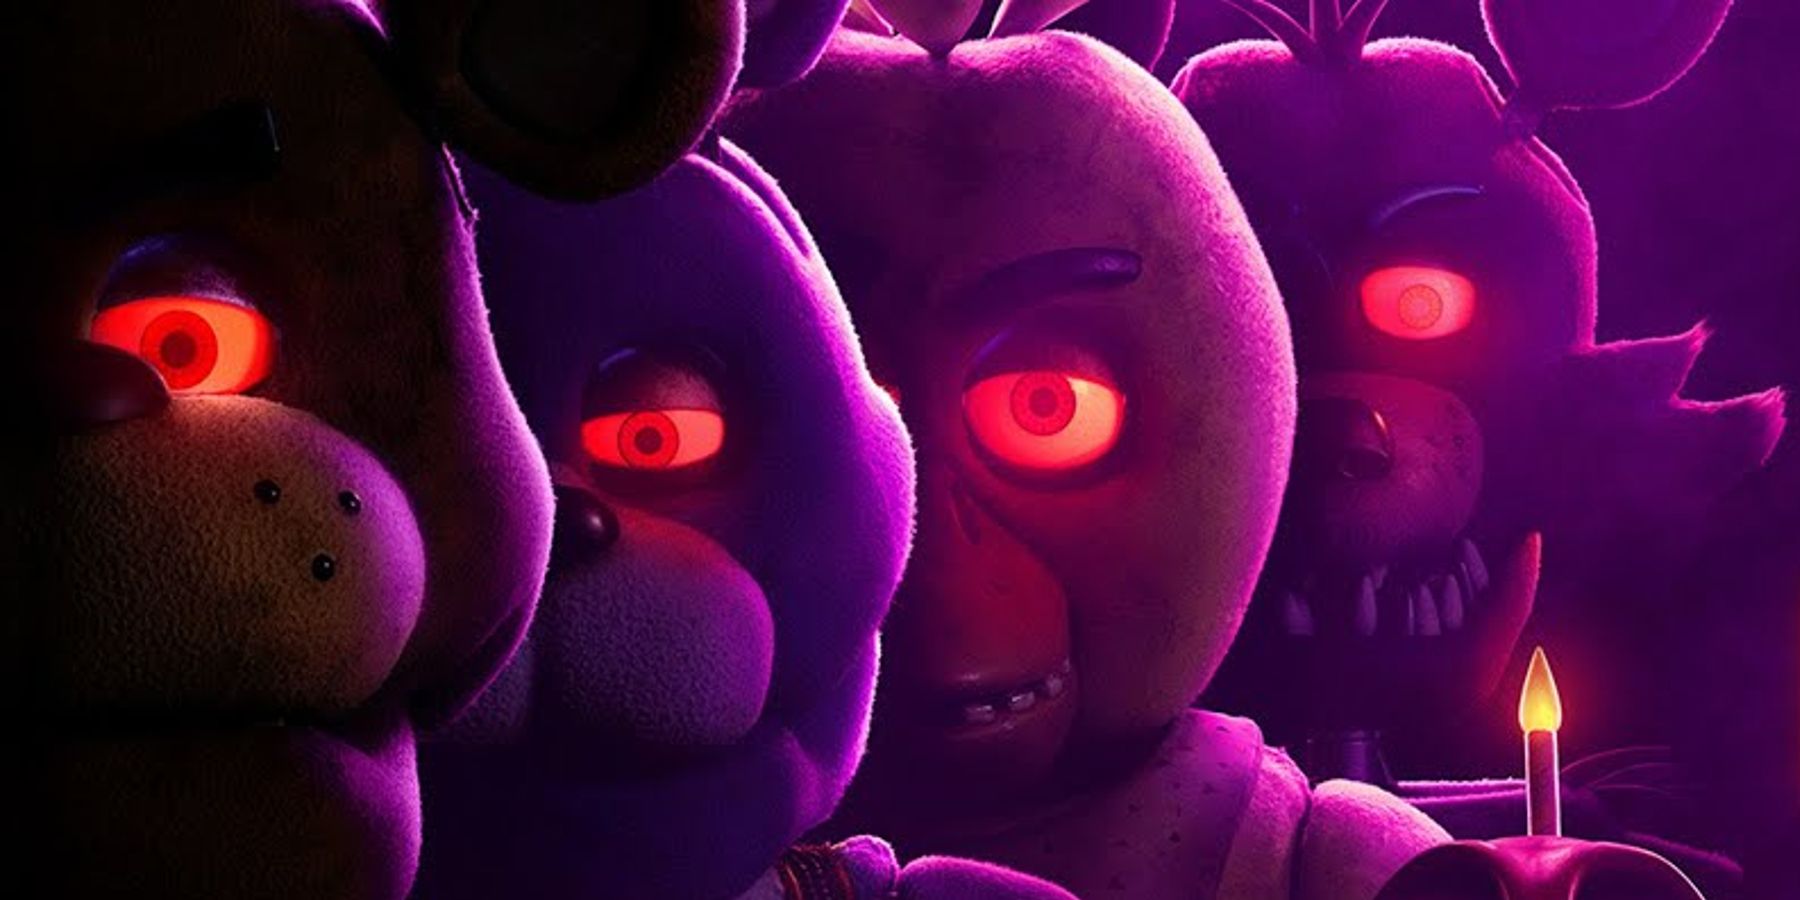 Five Nights at Freddy's: Security Breach Ruin DLC's Mission is Already Clear